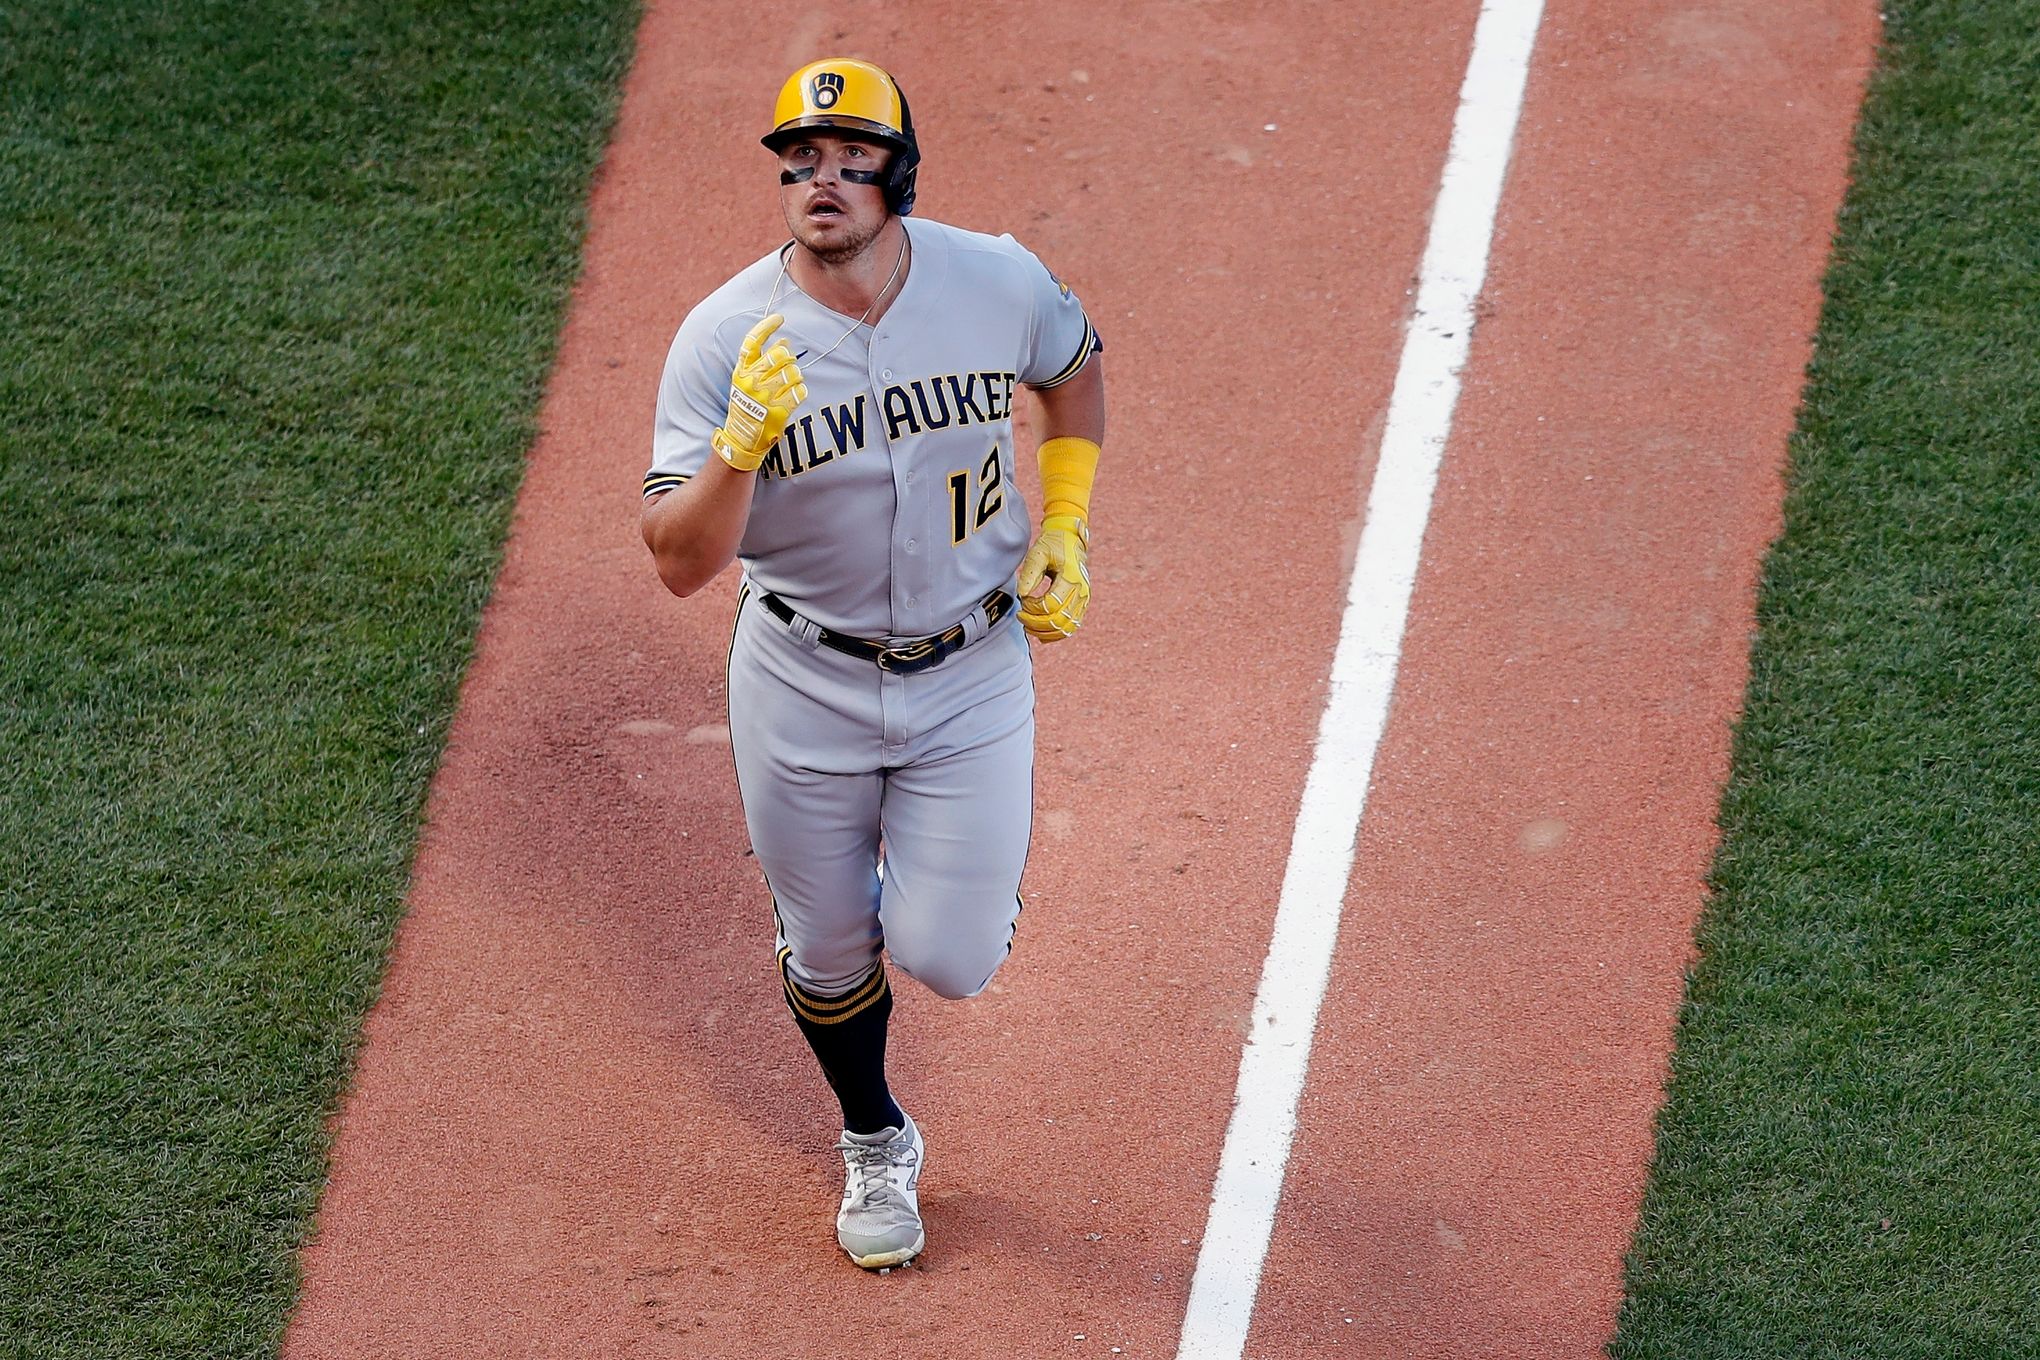 Four things to know about Hunter Renfroe, the newest Red Sox